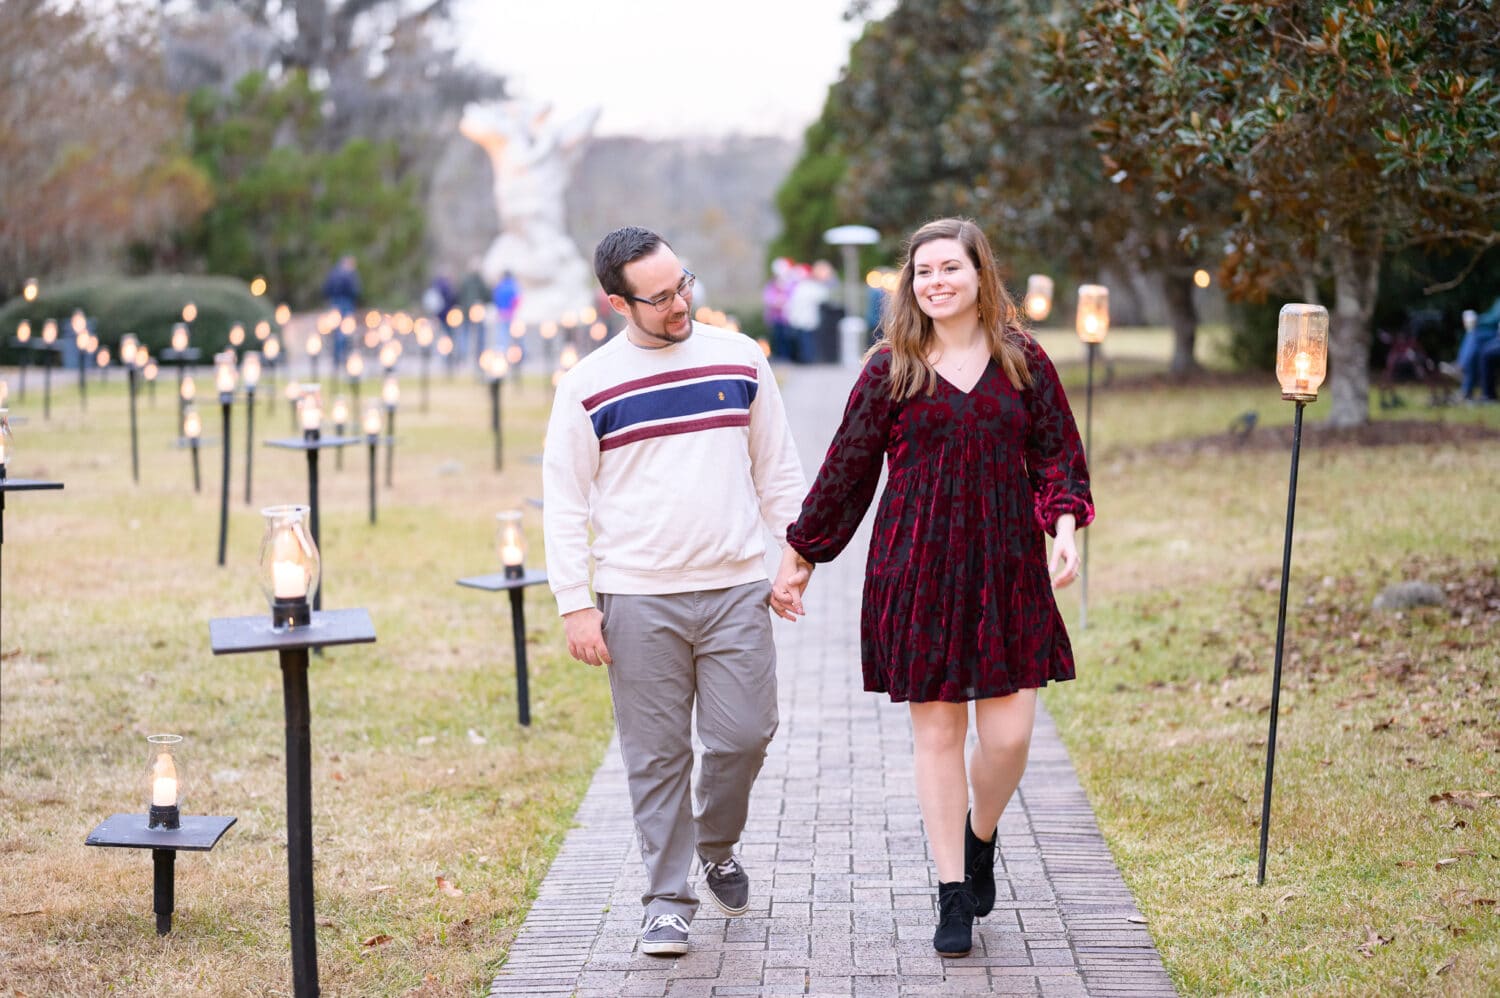 Walking together through the candles - Brookgreen Gardens